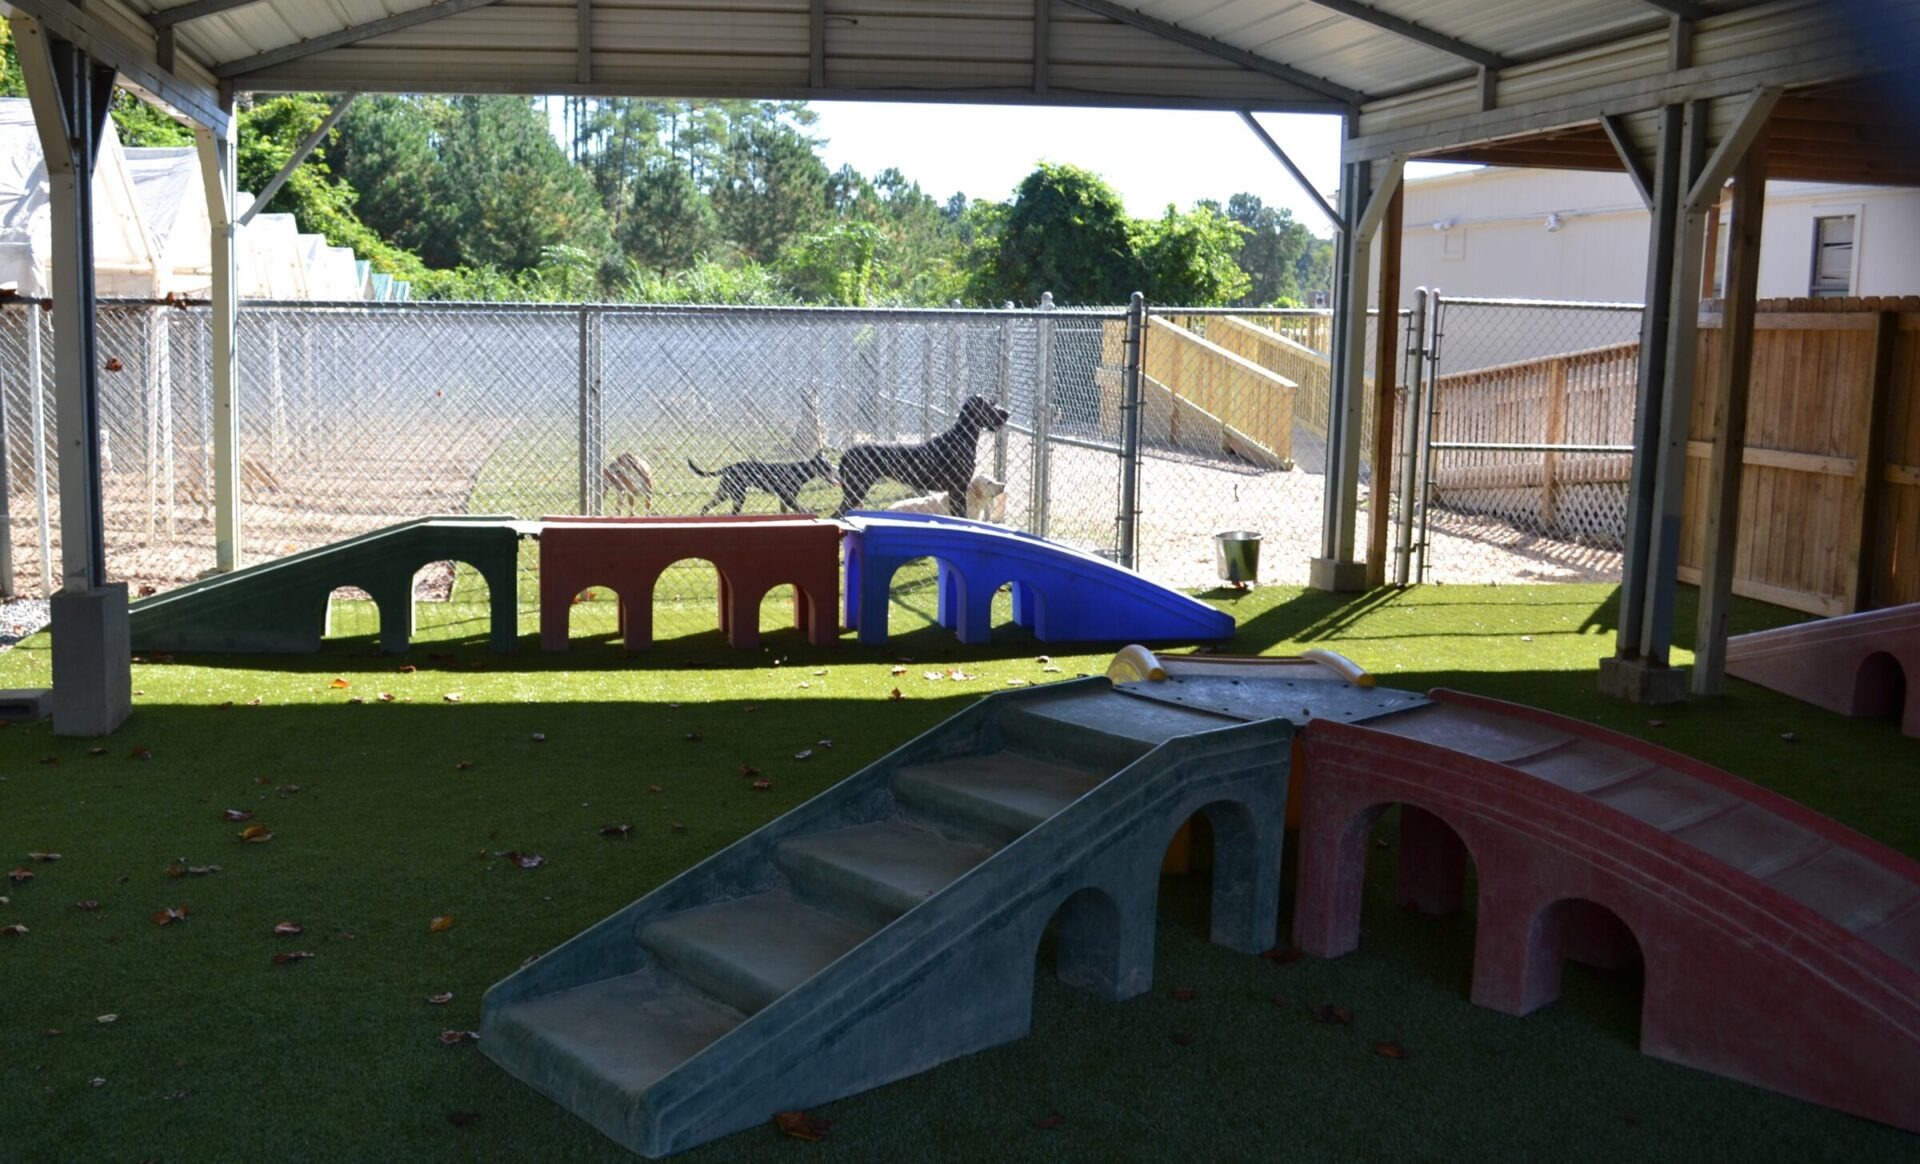 An outdoor dog playground with artificial grass, ramps, and stairs under a shelter, with two dogs in the background behind a fence.